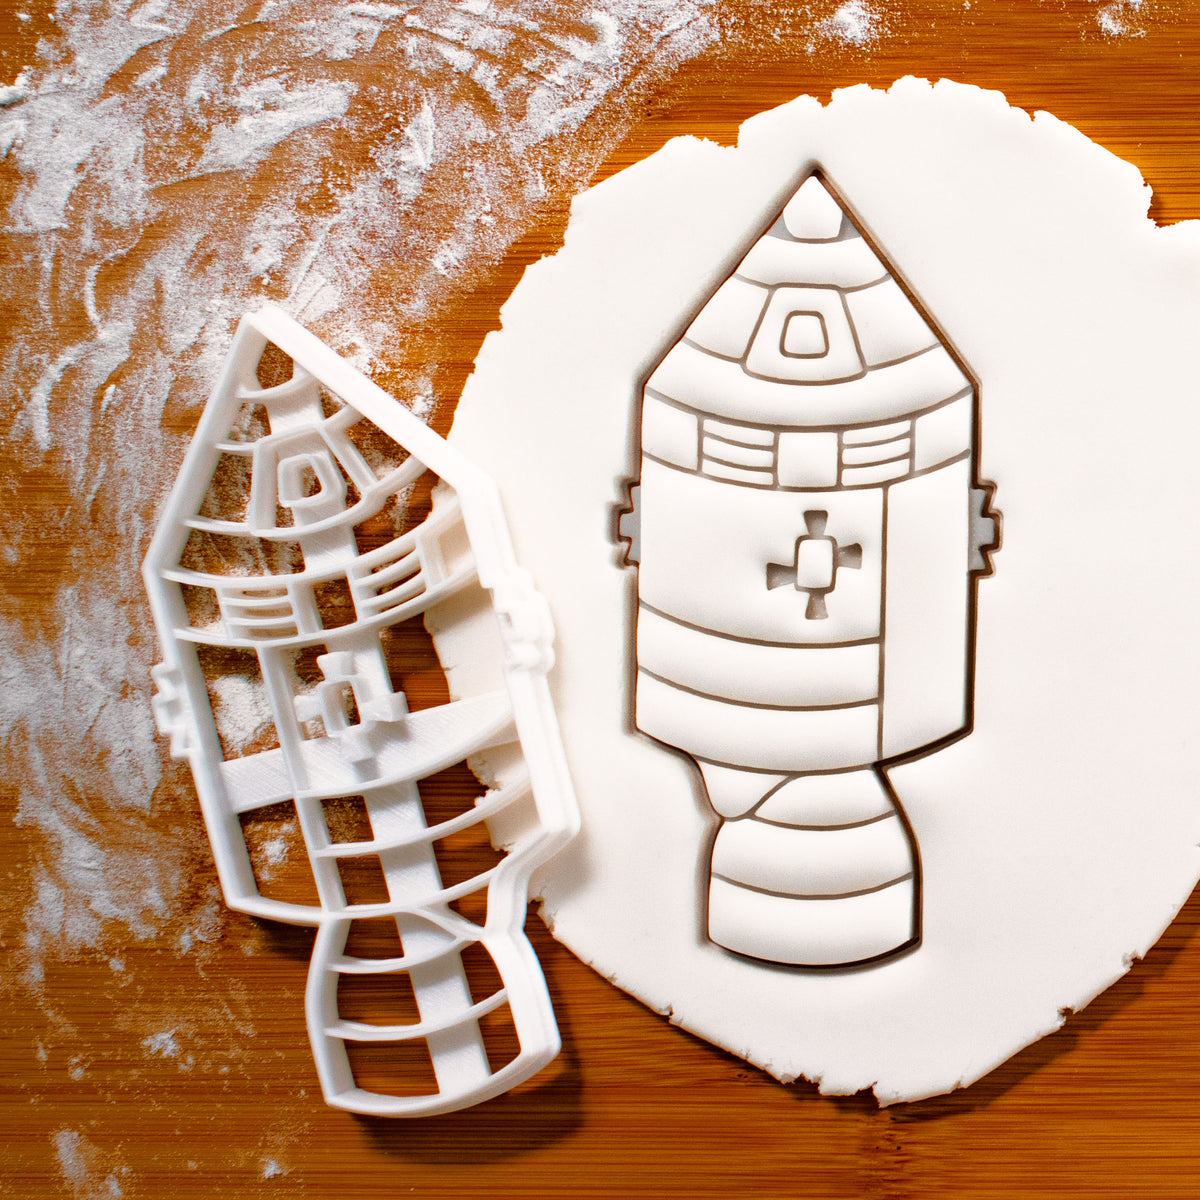 Space Command and Service Module cookie cutter